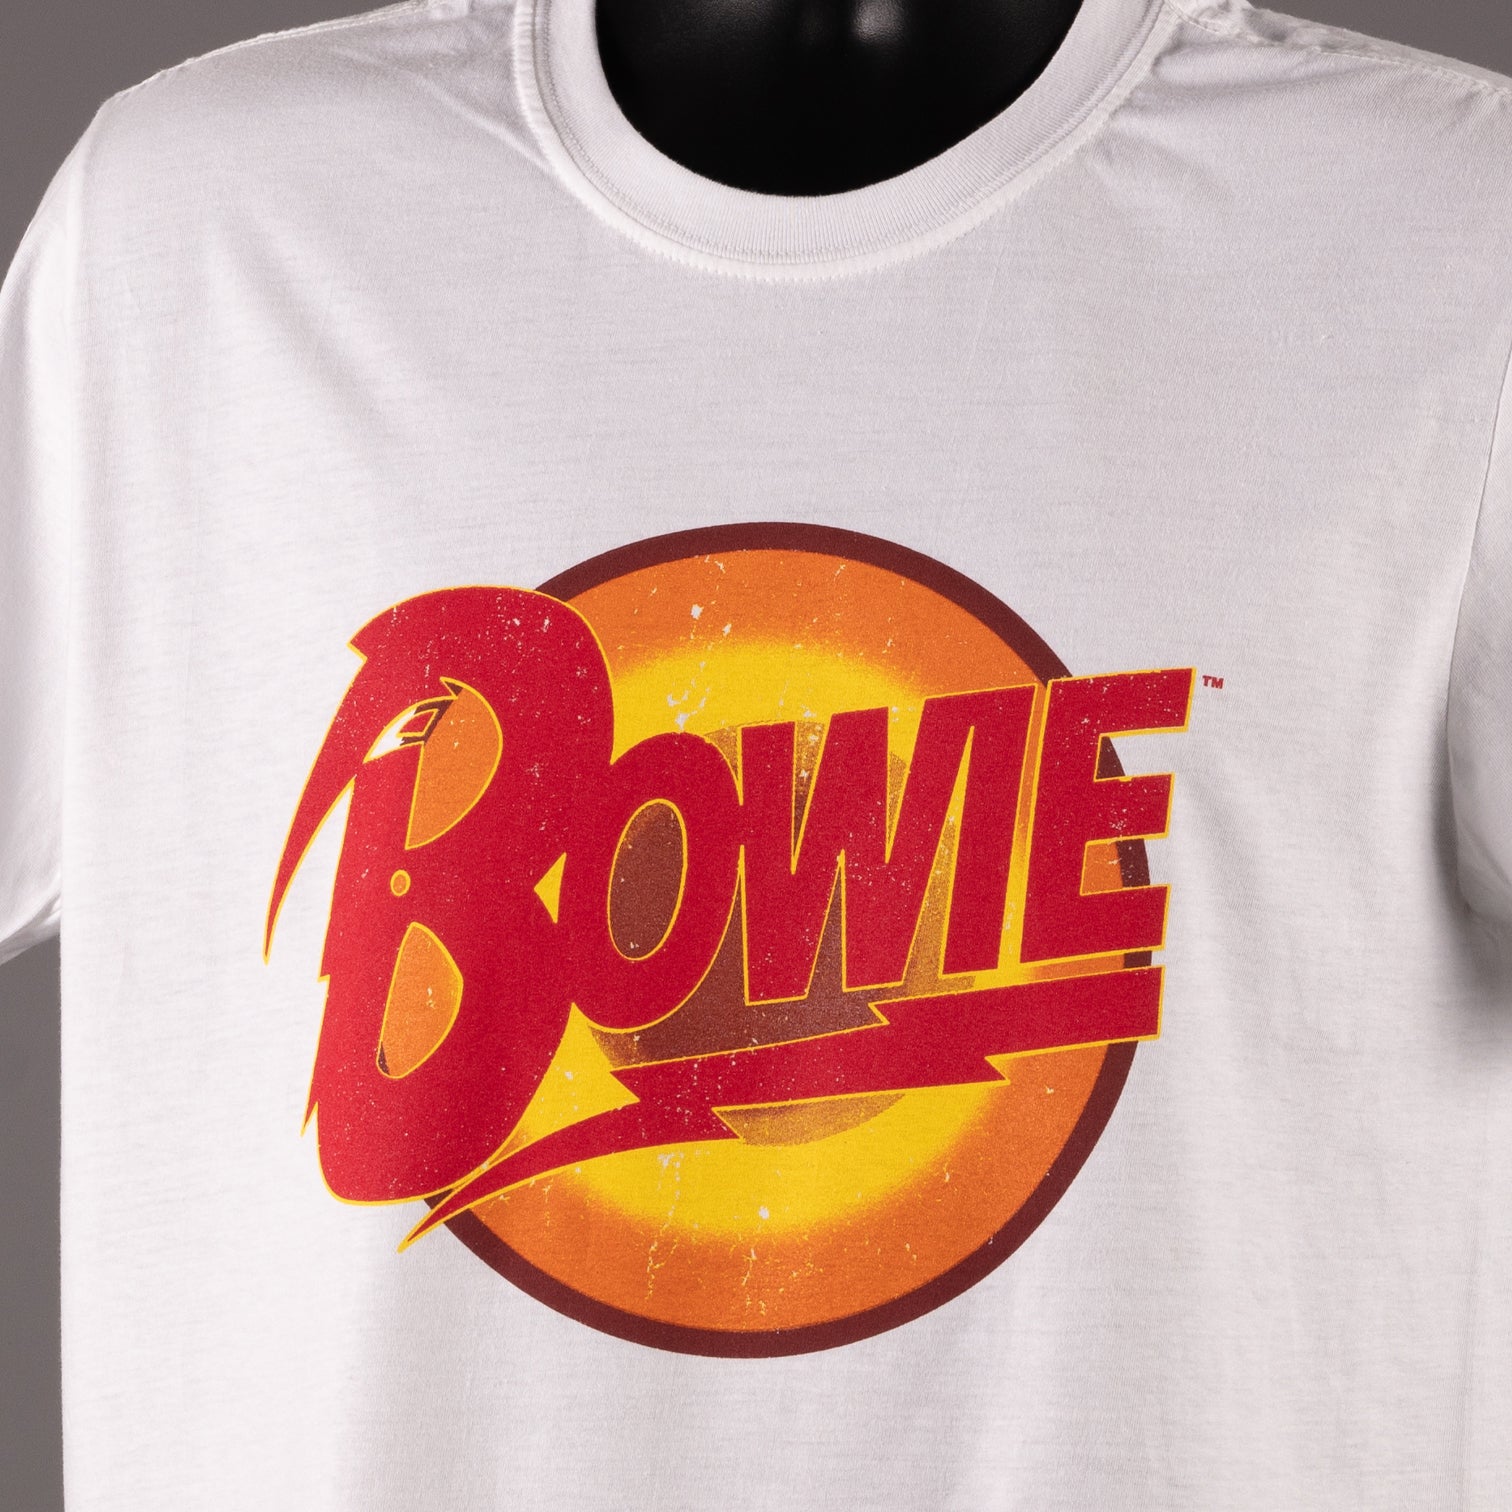 Bowie - Diamond Dogs T Shirt - White - New Item